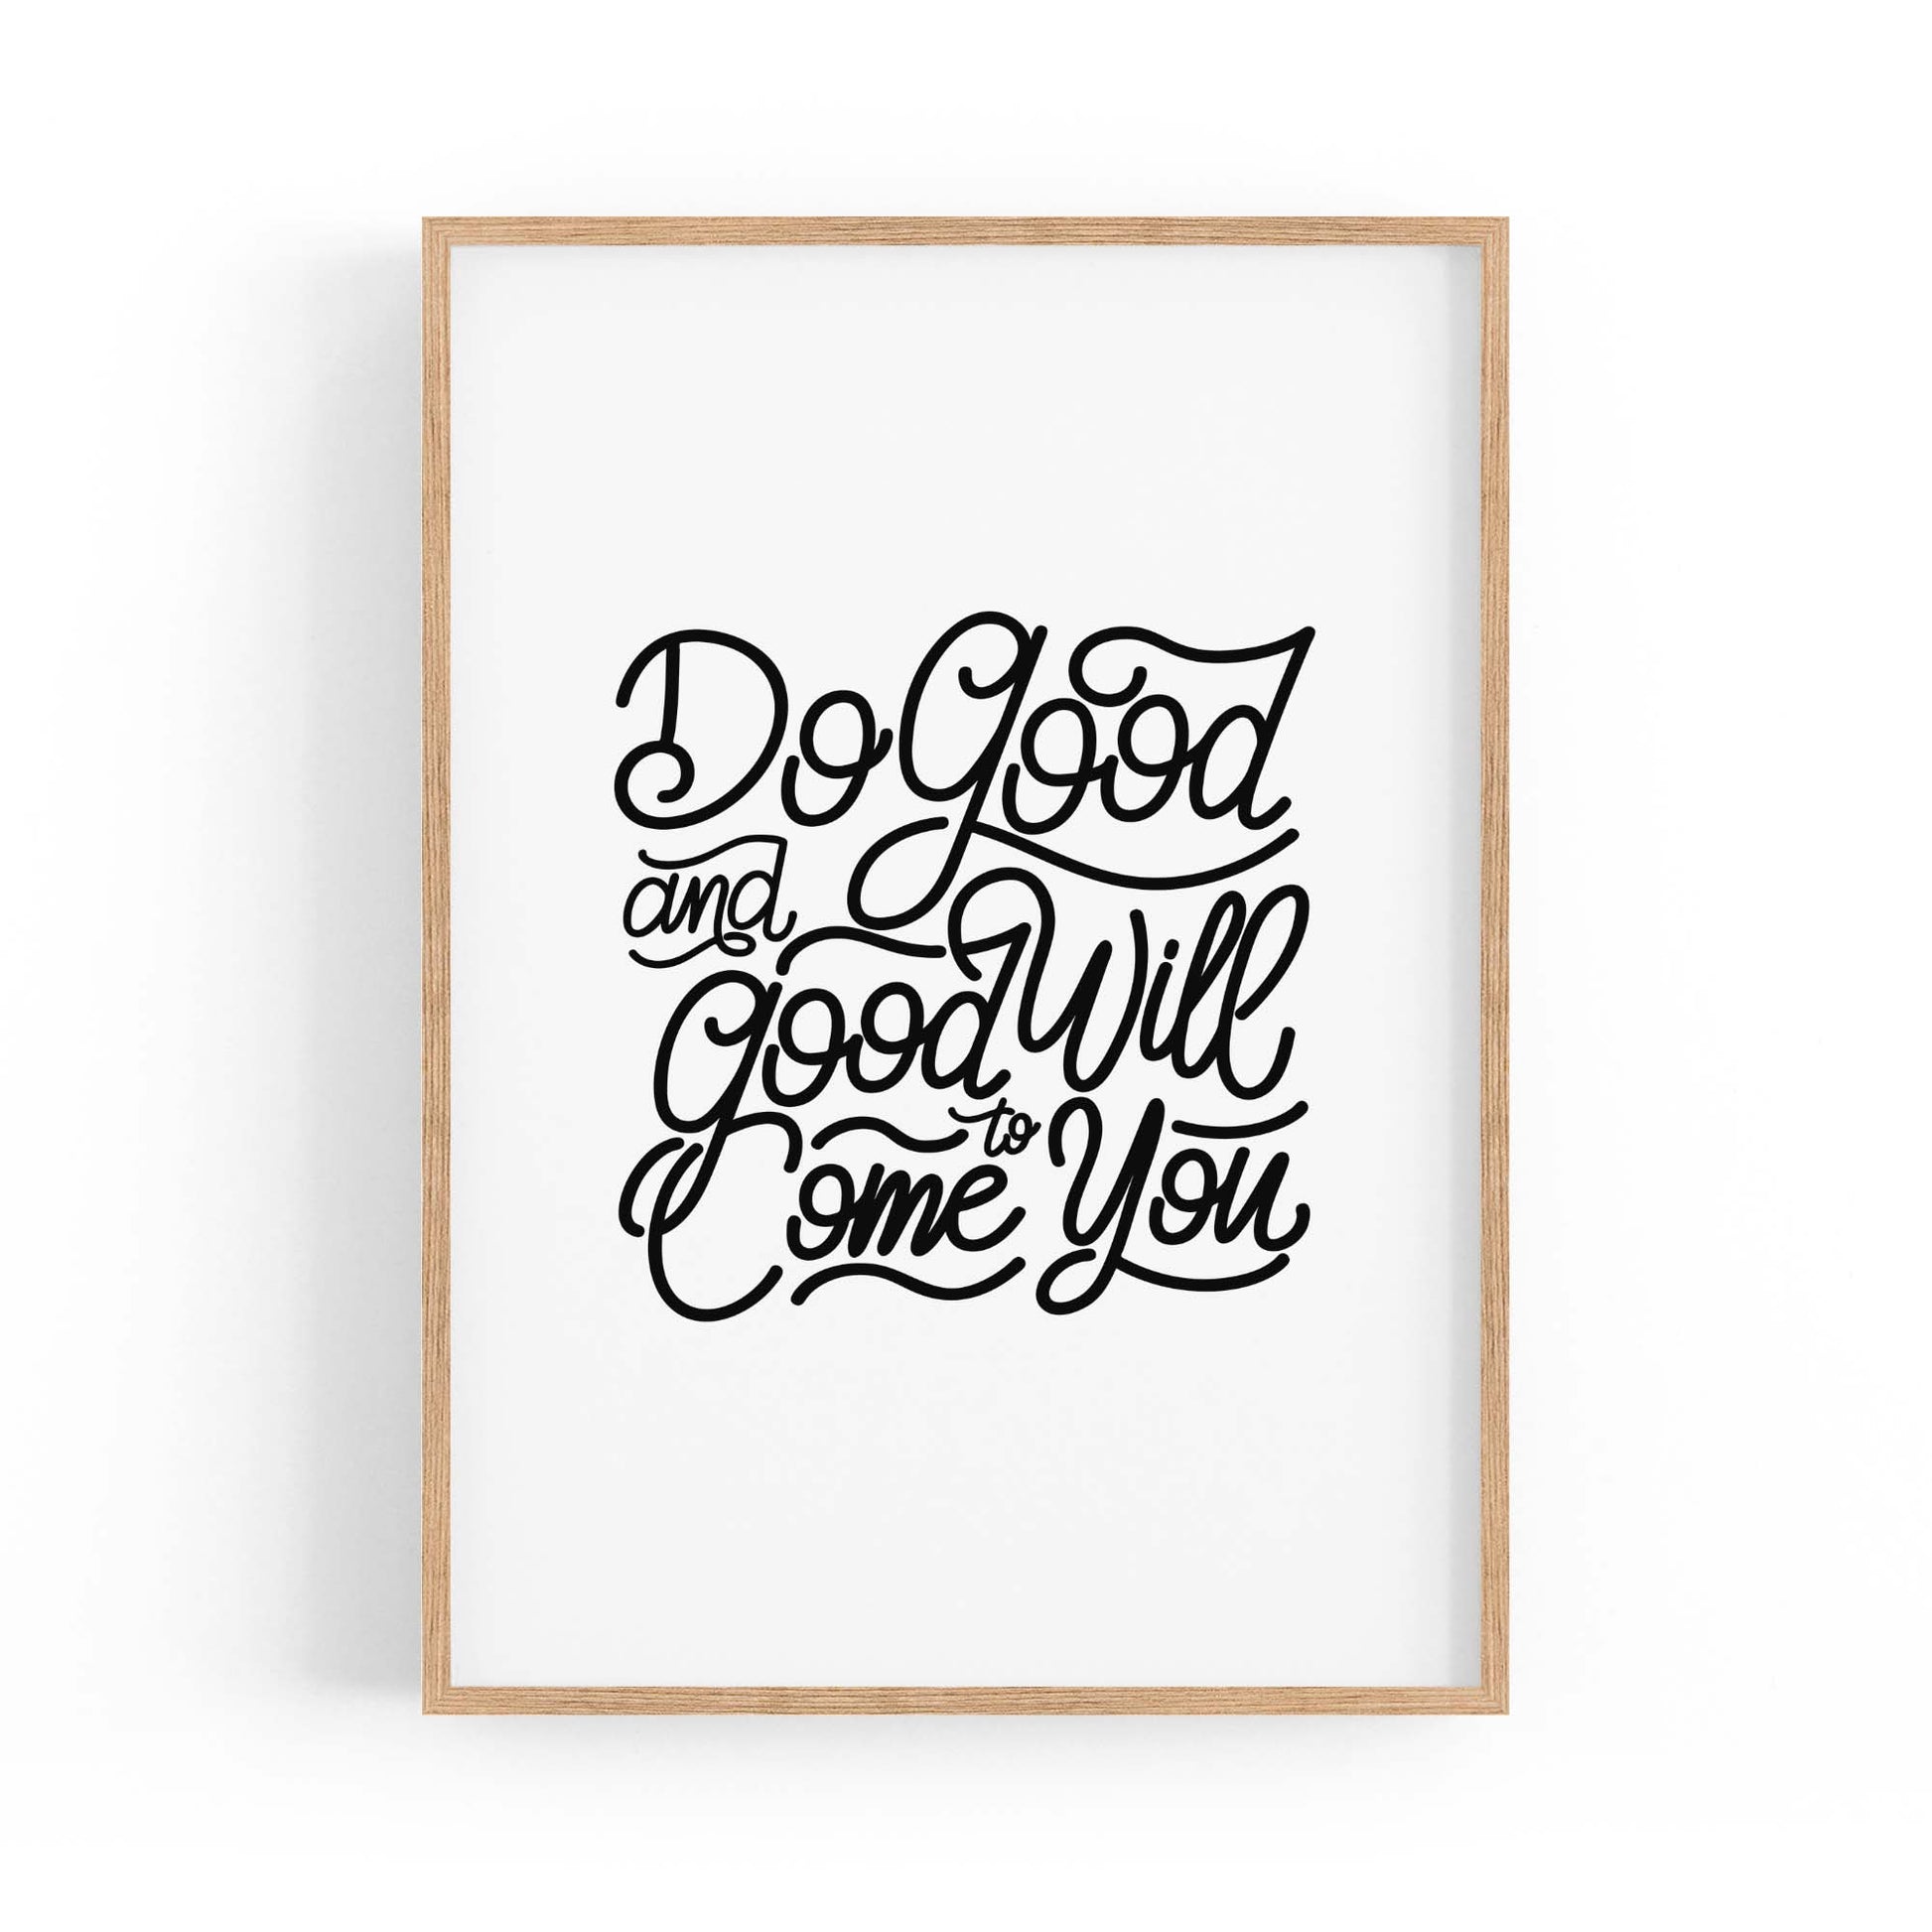 "Do Good" Inspirational Quote Artwork Wall Art - The Affordable Art Company